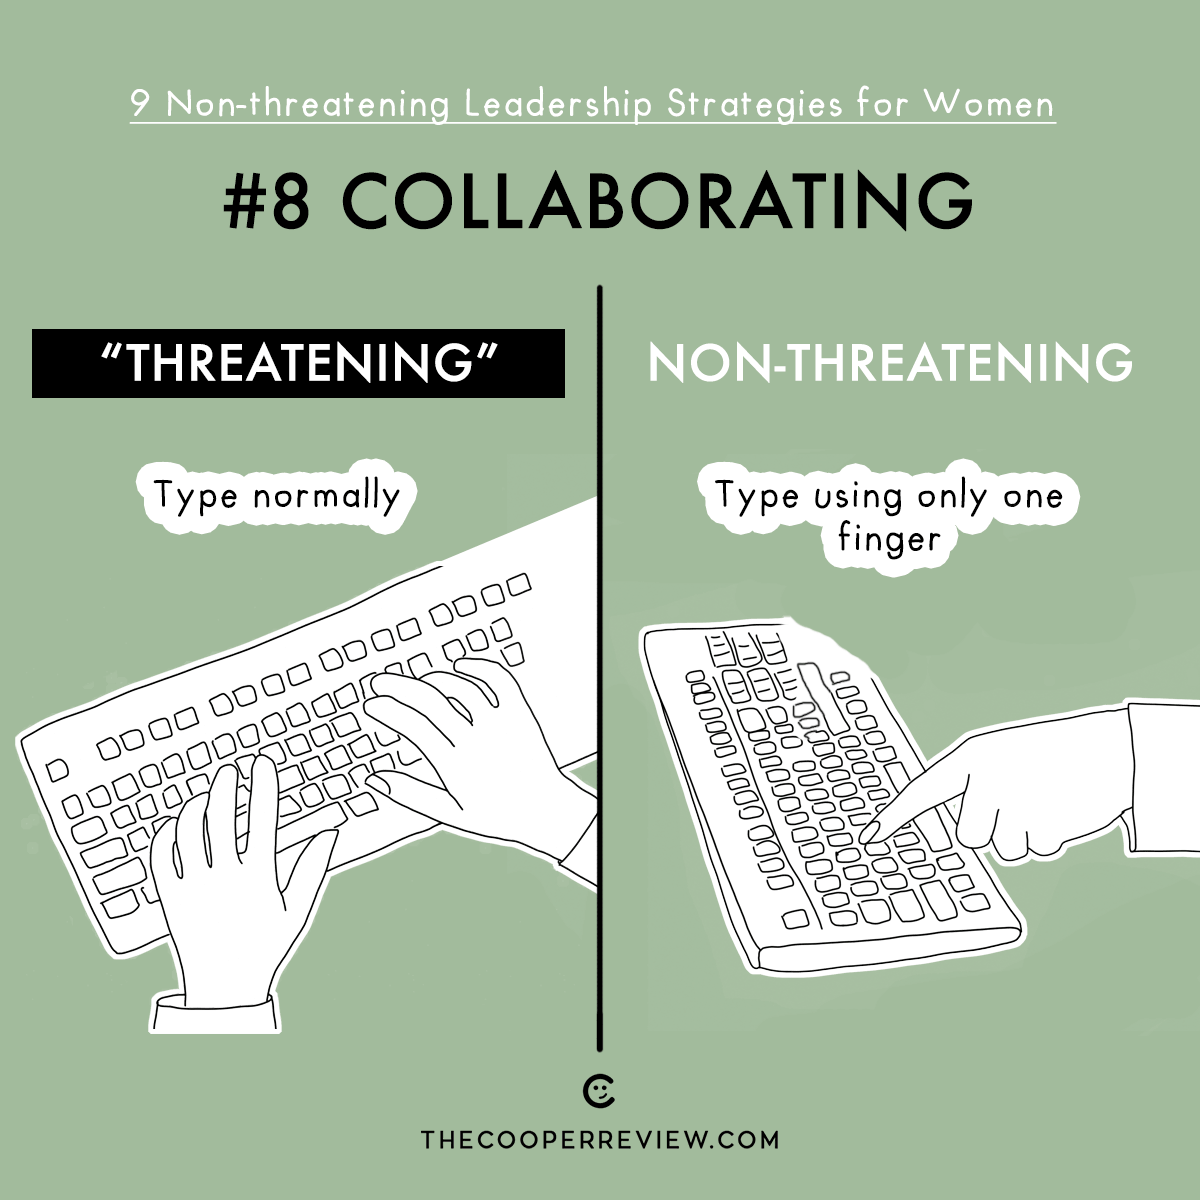 #8 Collaborating. Threatening: Type normally. Non-threatening: Type using only one finger.